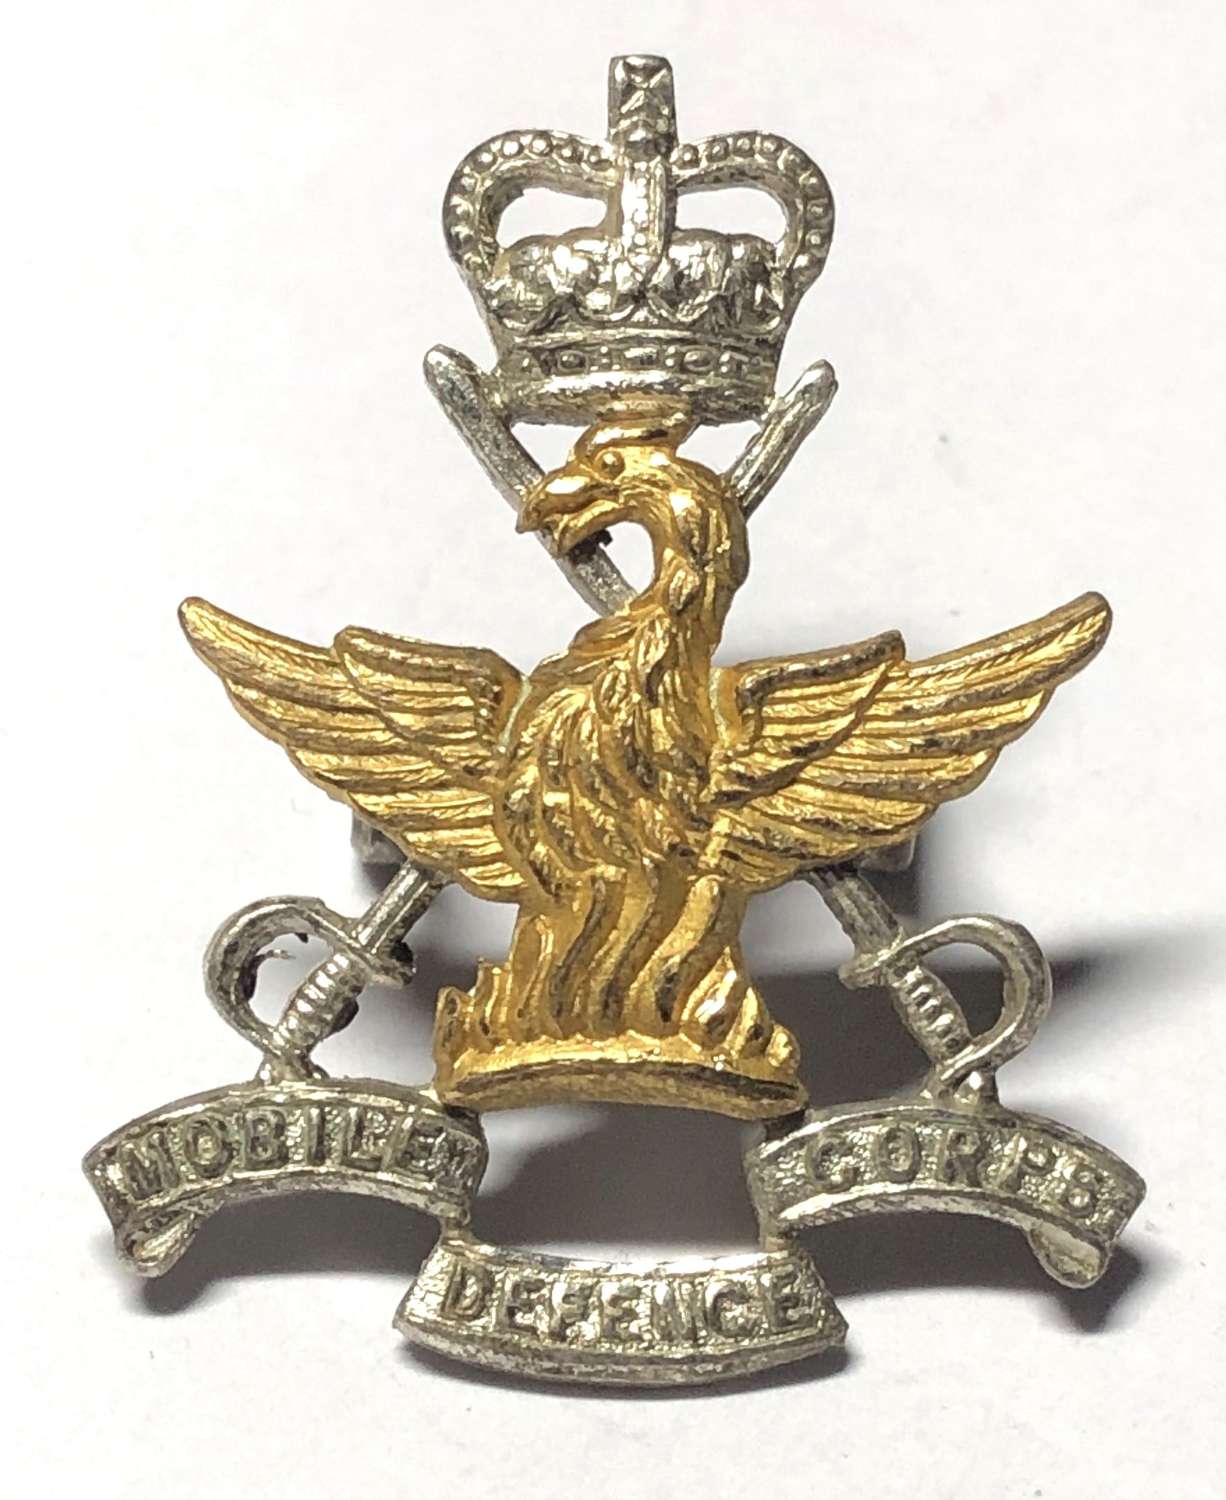 Mobile Defence Corps Officer's cap badge circa 1955-59 by Gaunt.